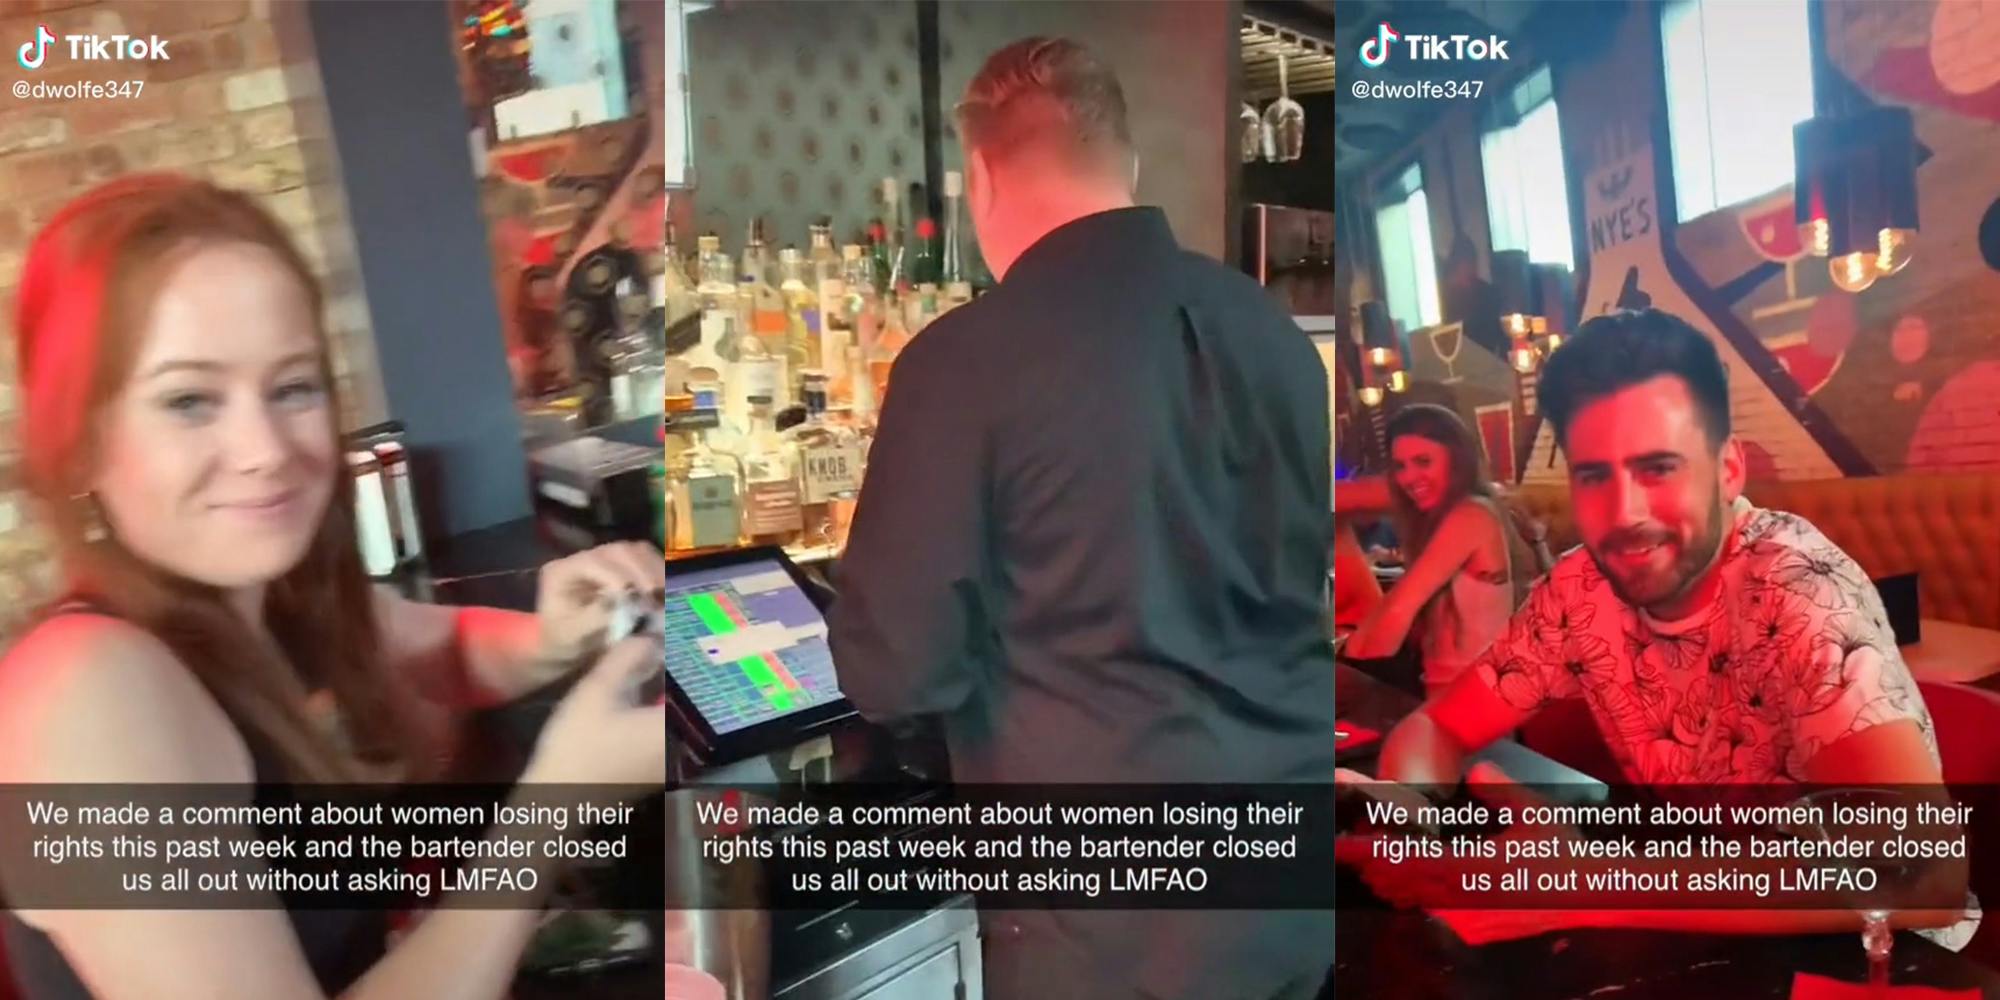 young woman at bar (l) bartender with back to bar (c) man at bar (r) all with caption "We made a comment about women losing their rights this past week and the bartender closed us all out without asking LMFAO"